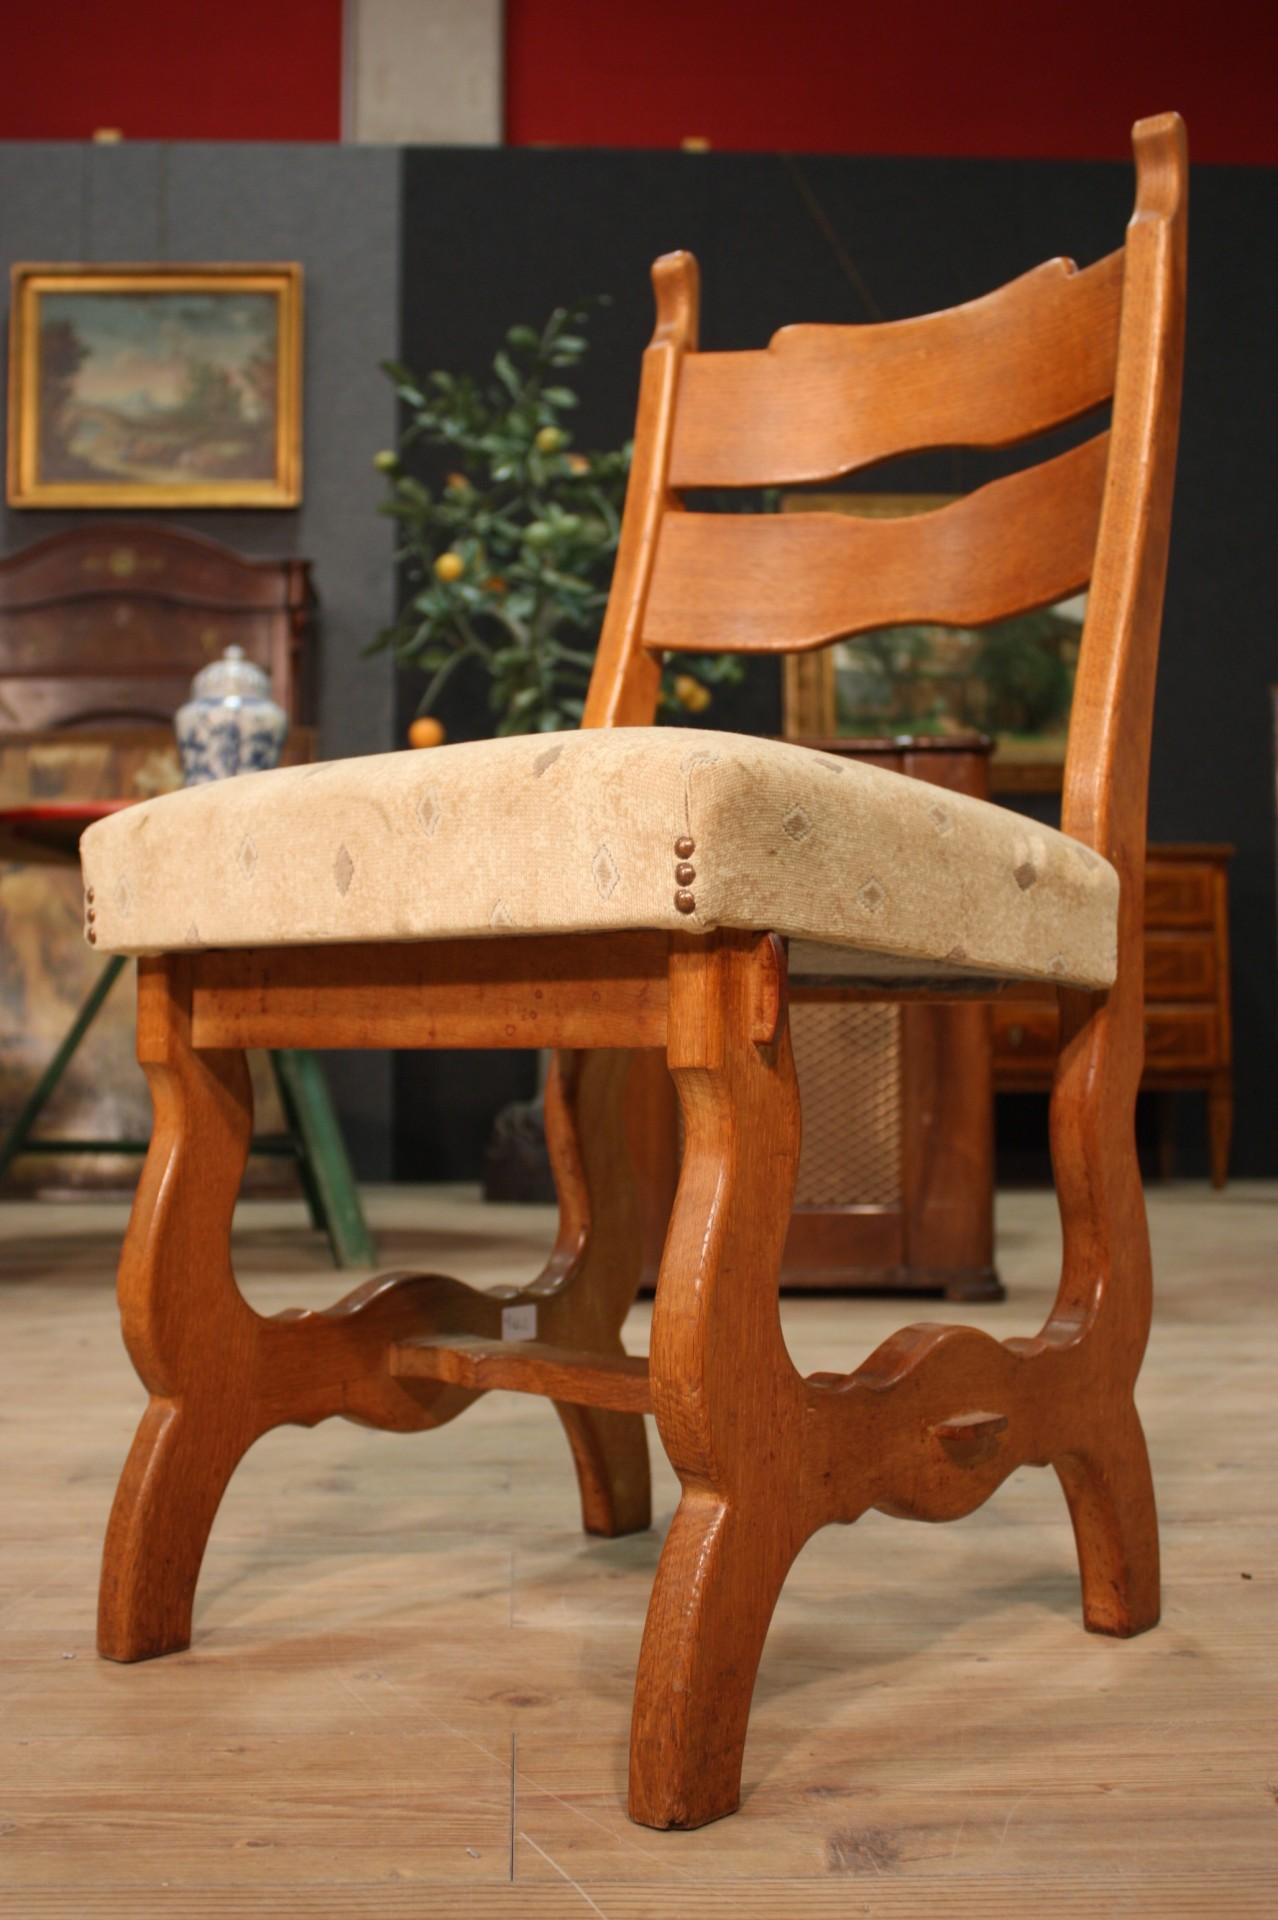 Group of 4 rustic chairs, from northern Europe, from the mid-20th century. Furniture carved in oakwood. Seats covered in light fabric in good condition, with some small signs of aging. Padding in good condition. Living room or dining room chairs